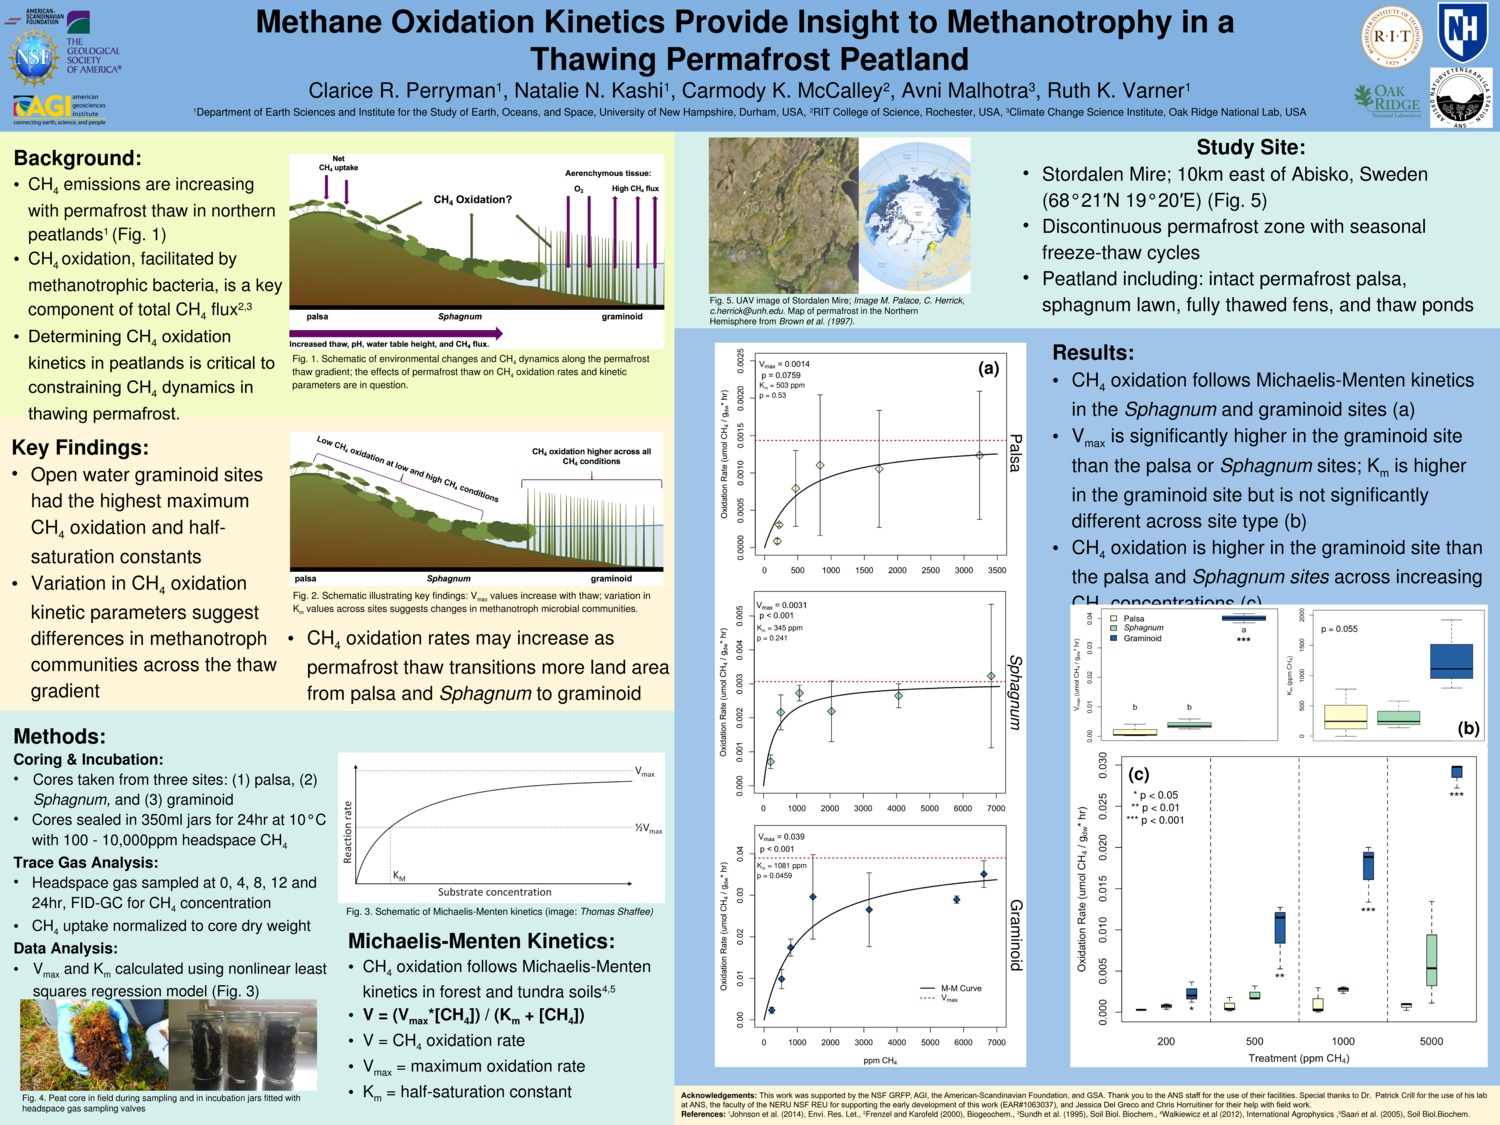 Methane Oxidation Kinetics Provide Insight To Methanotrophy In A  Thawing Permafrost Peatland by crp1006